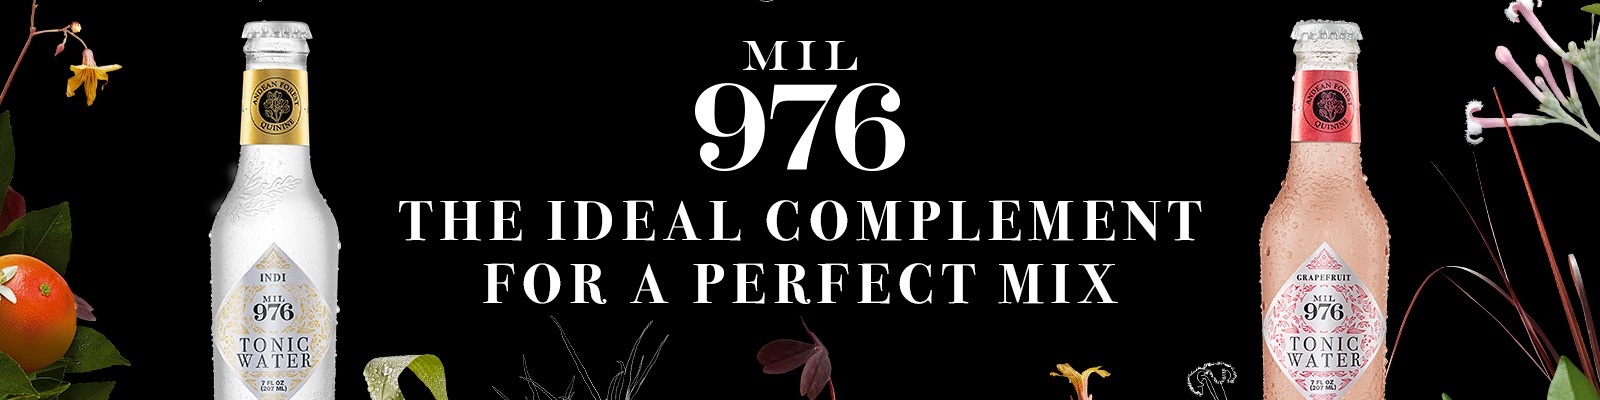 mil 976 the ideal complement for a perfect mix